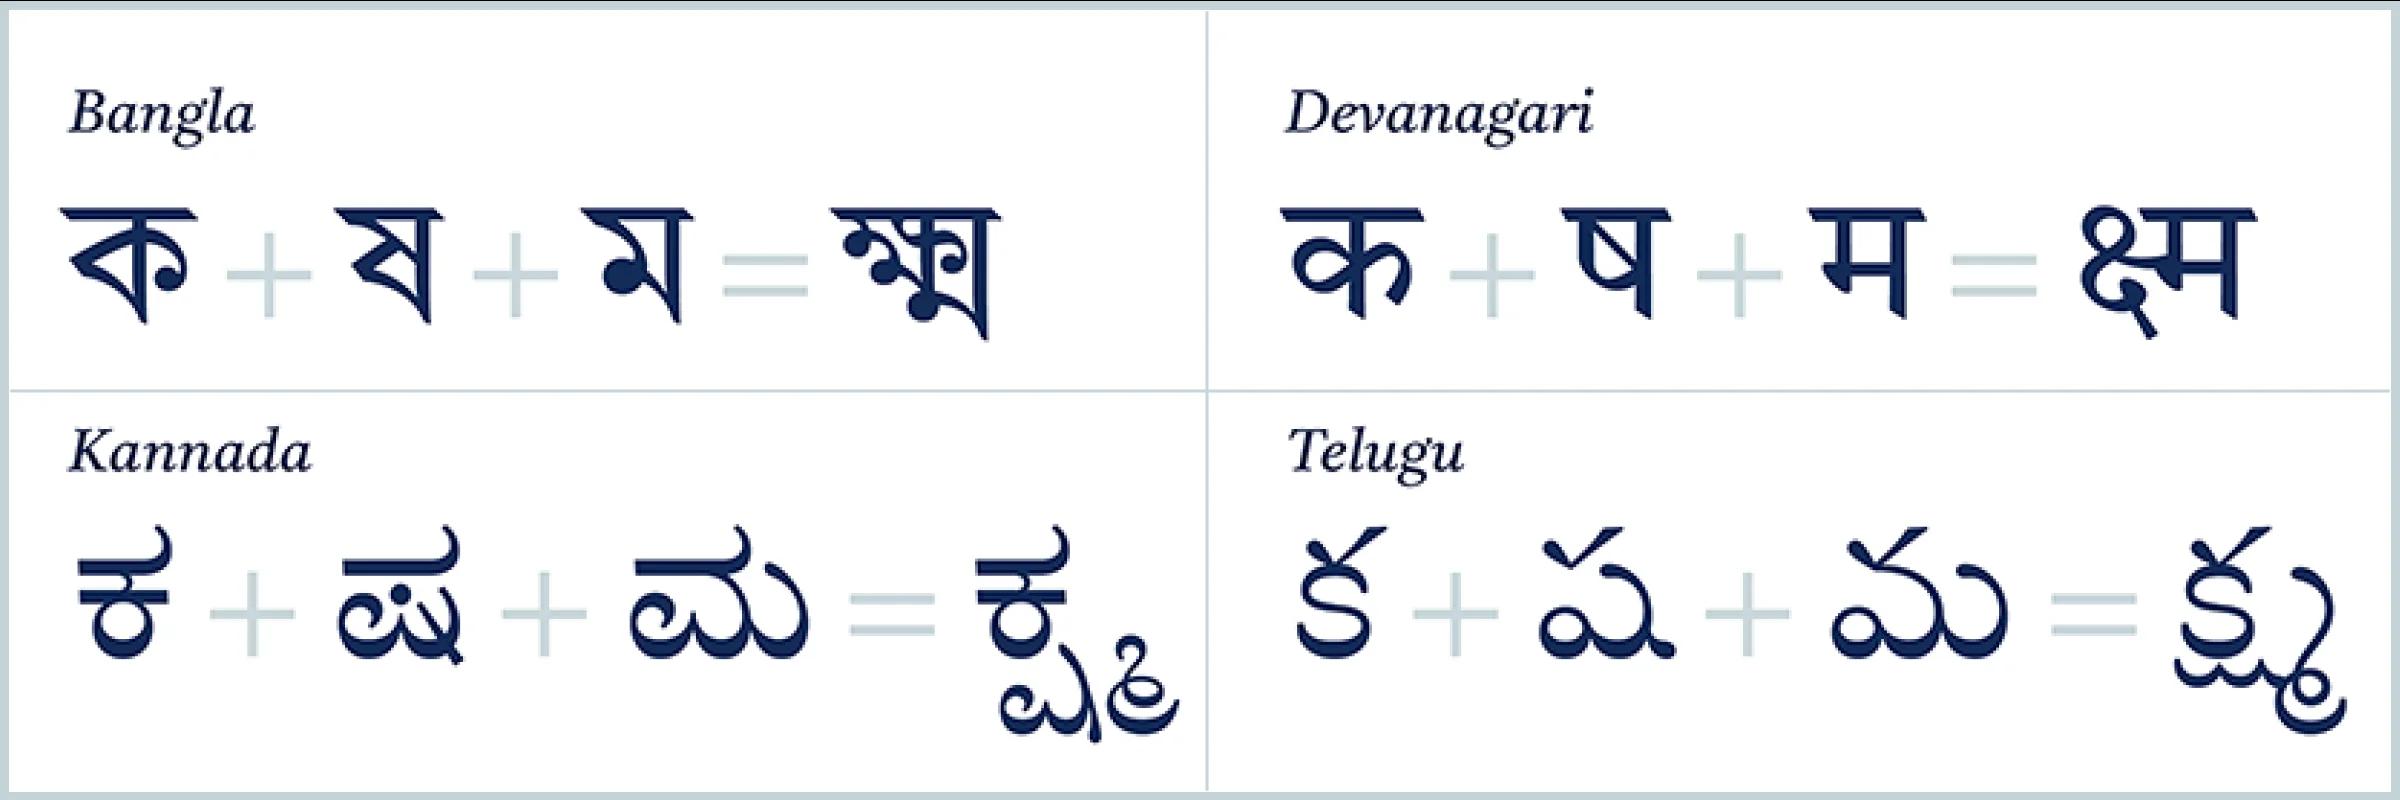 4 examples in Bangla, Devanagari, Kannada, and Telugu showing three letters separately and then combined to form a conjunct.